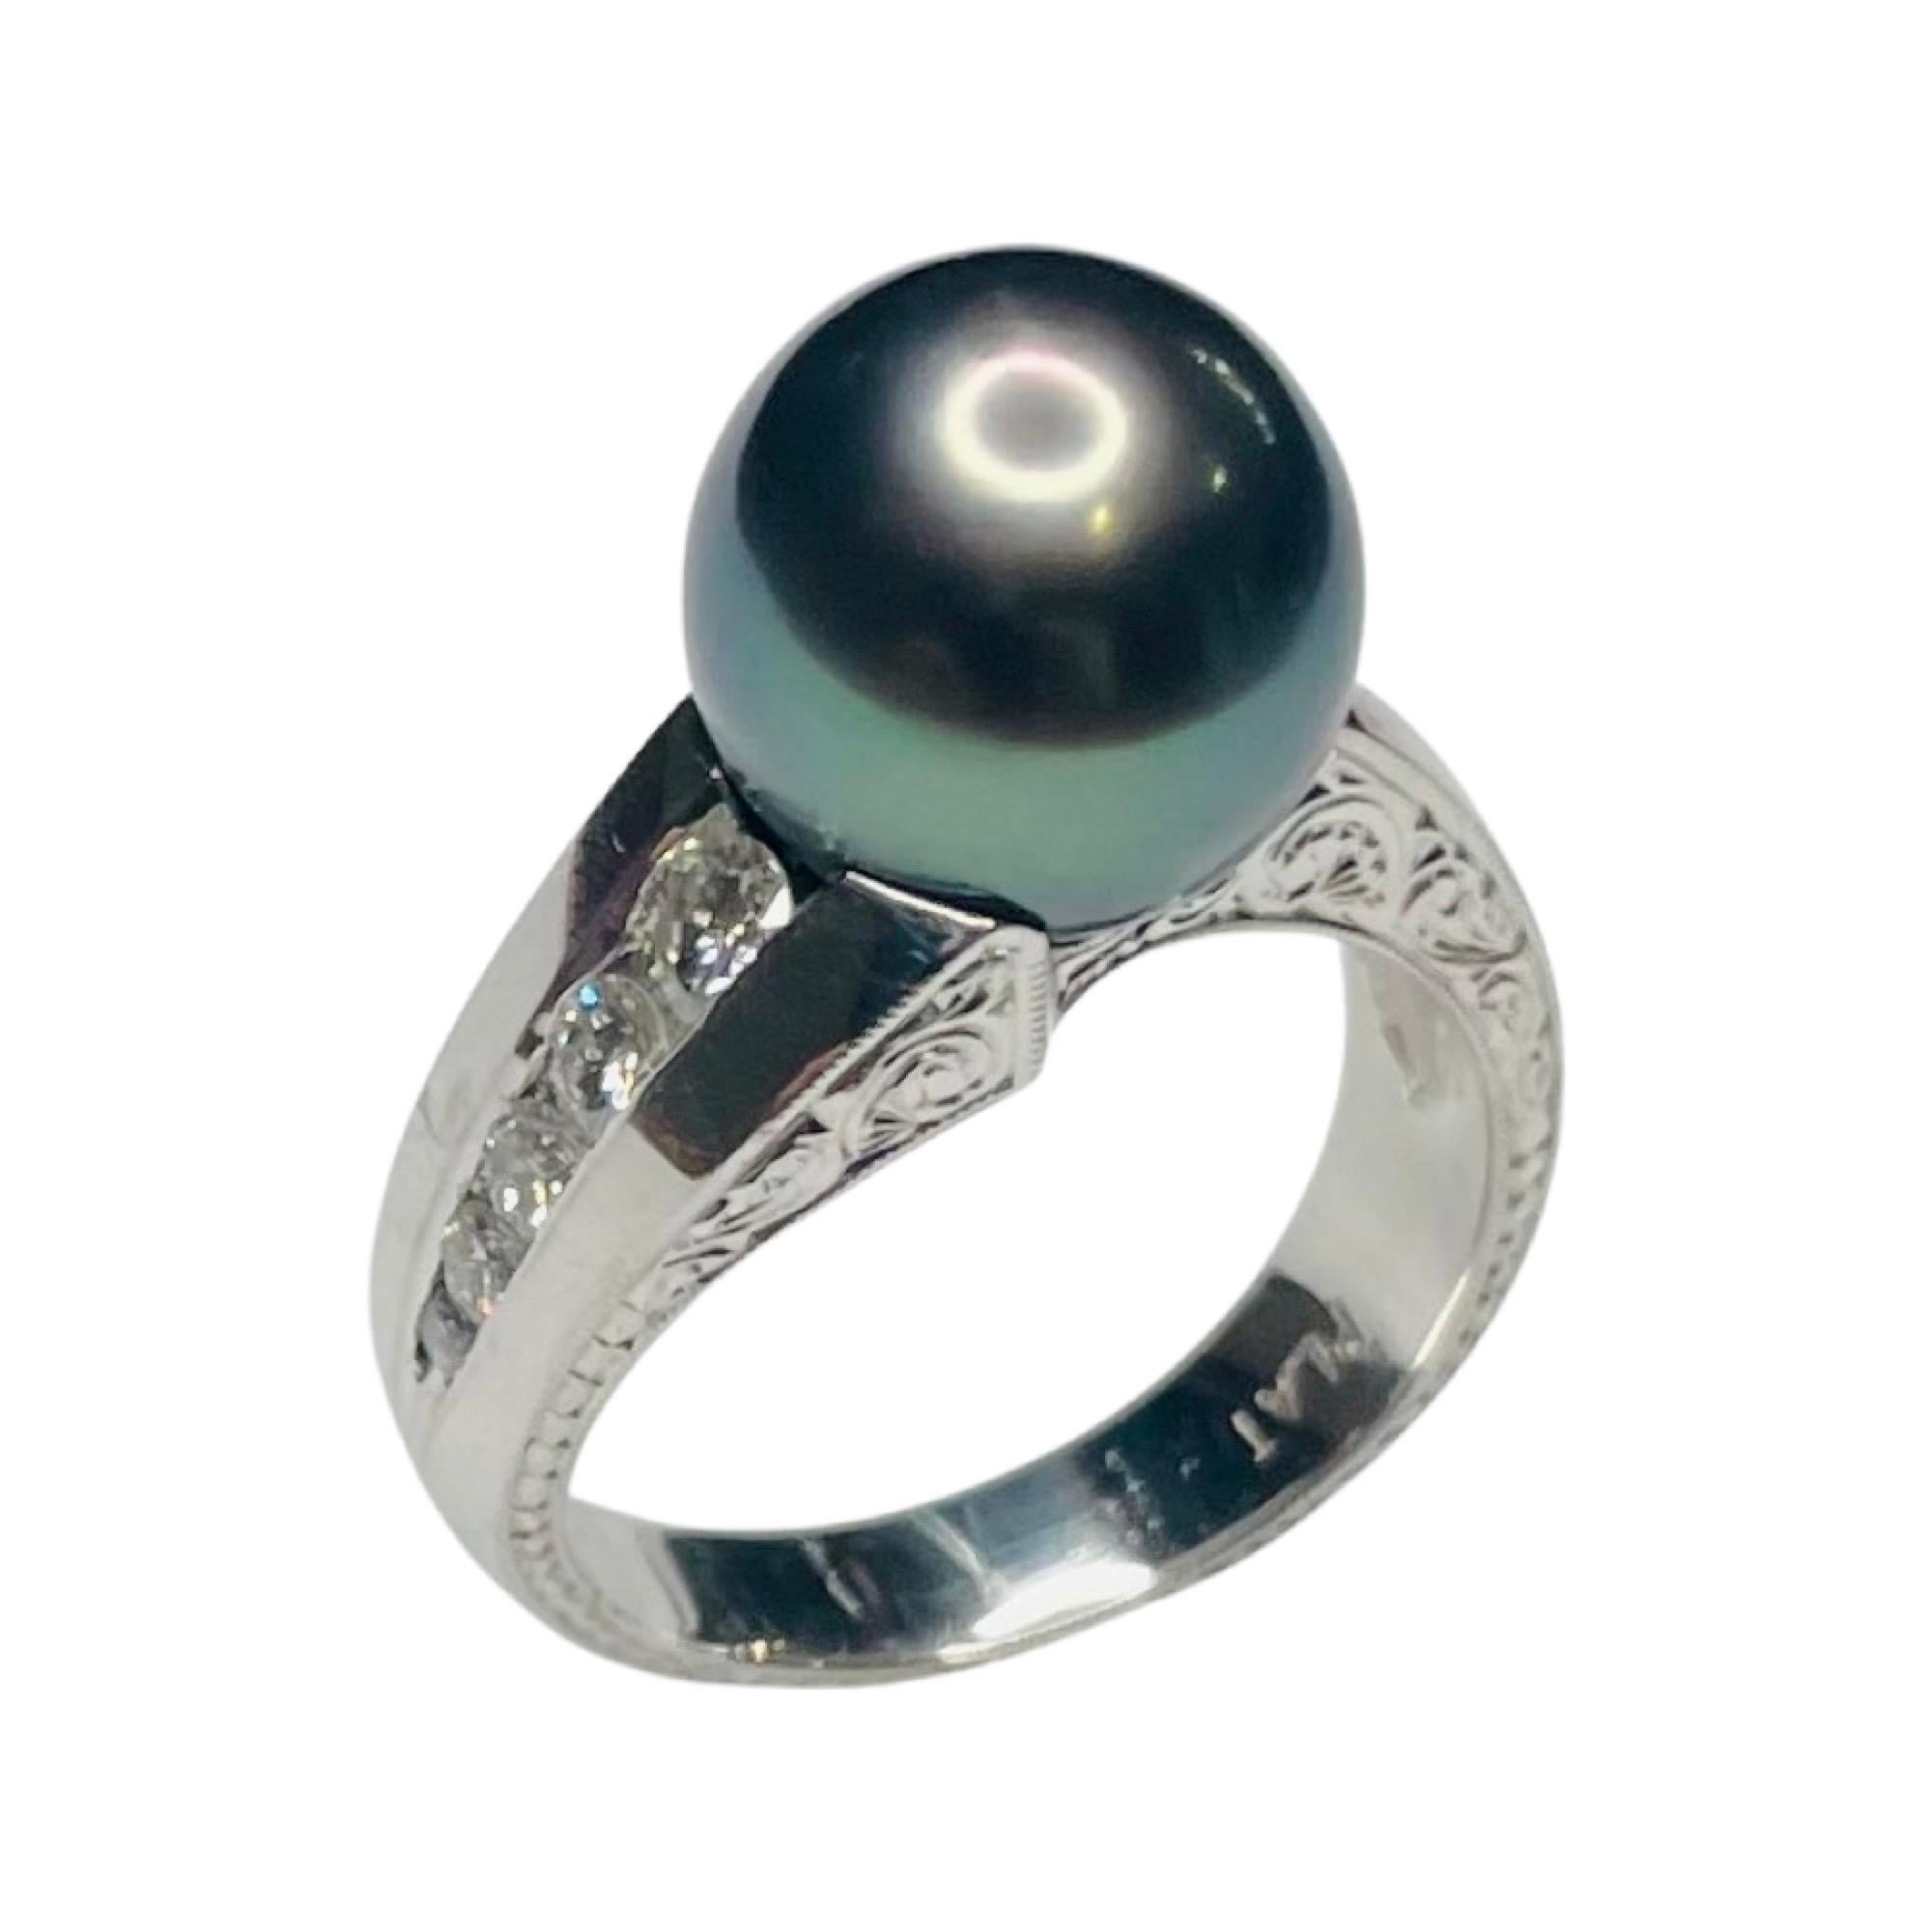 Majestic Art Platinum Cultured Black Tahitian Pearl and Diamond Ring In New Condition For Sale In Kirkwood, MO